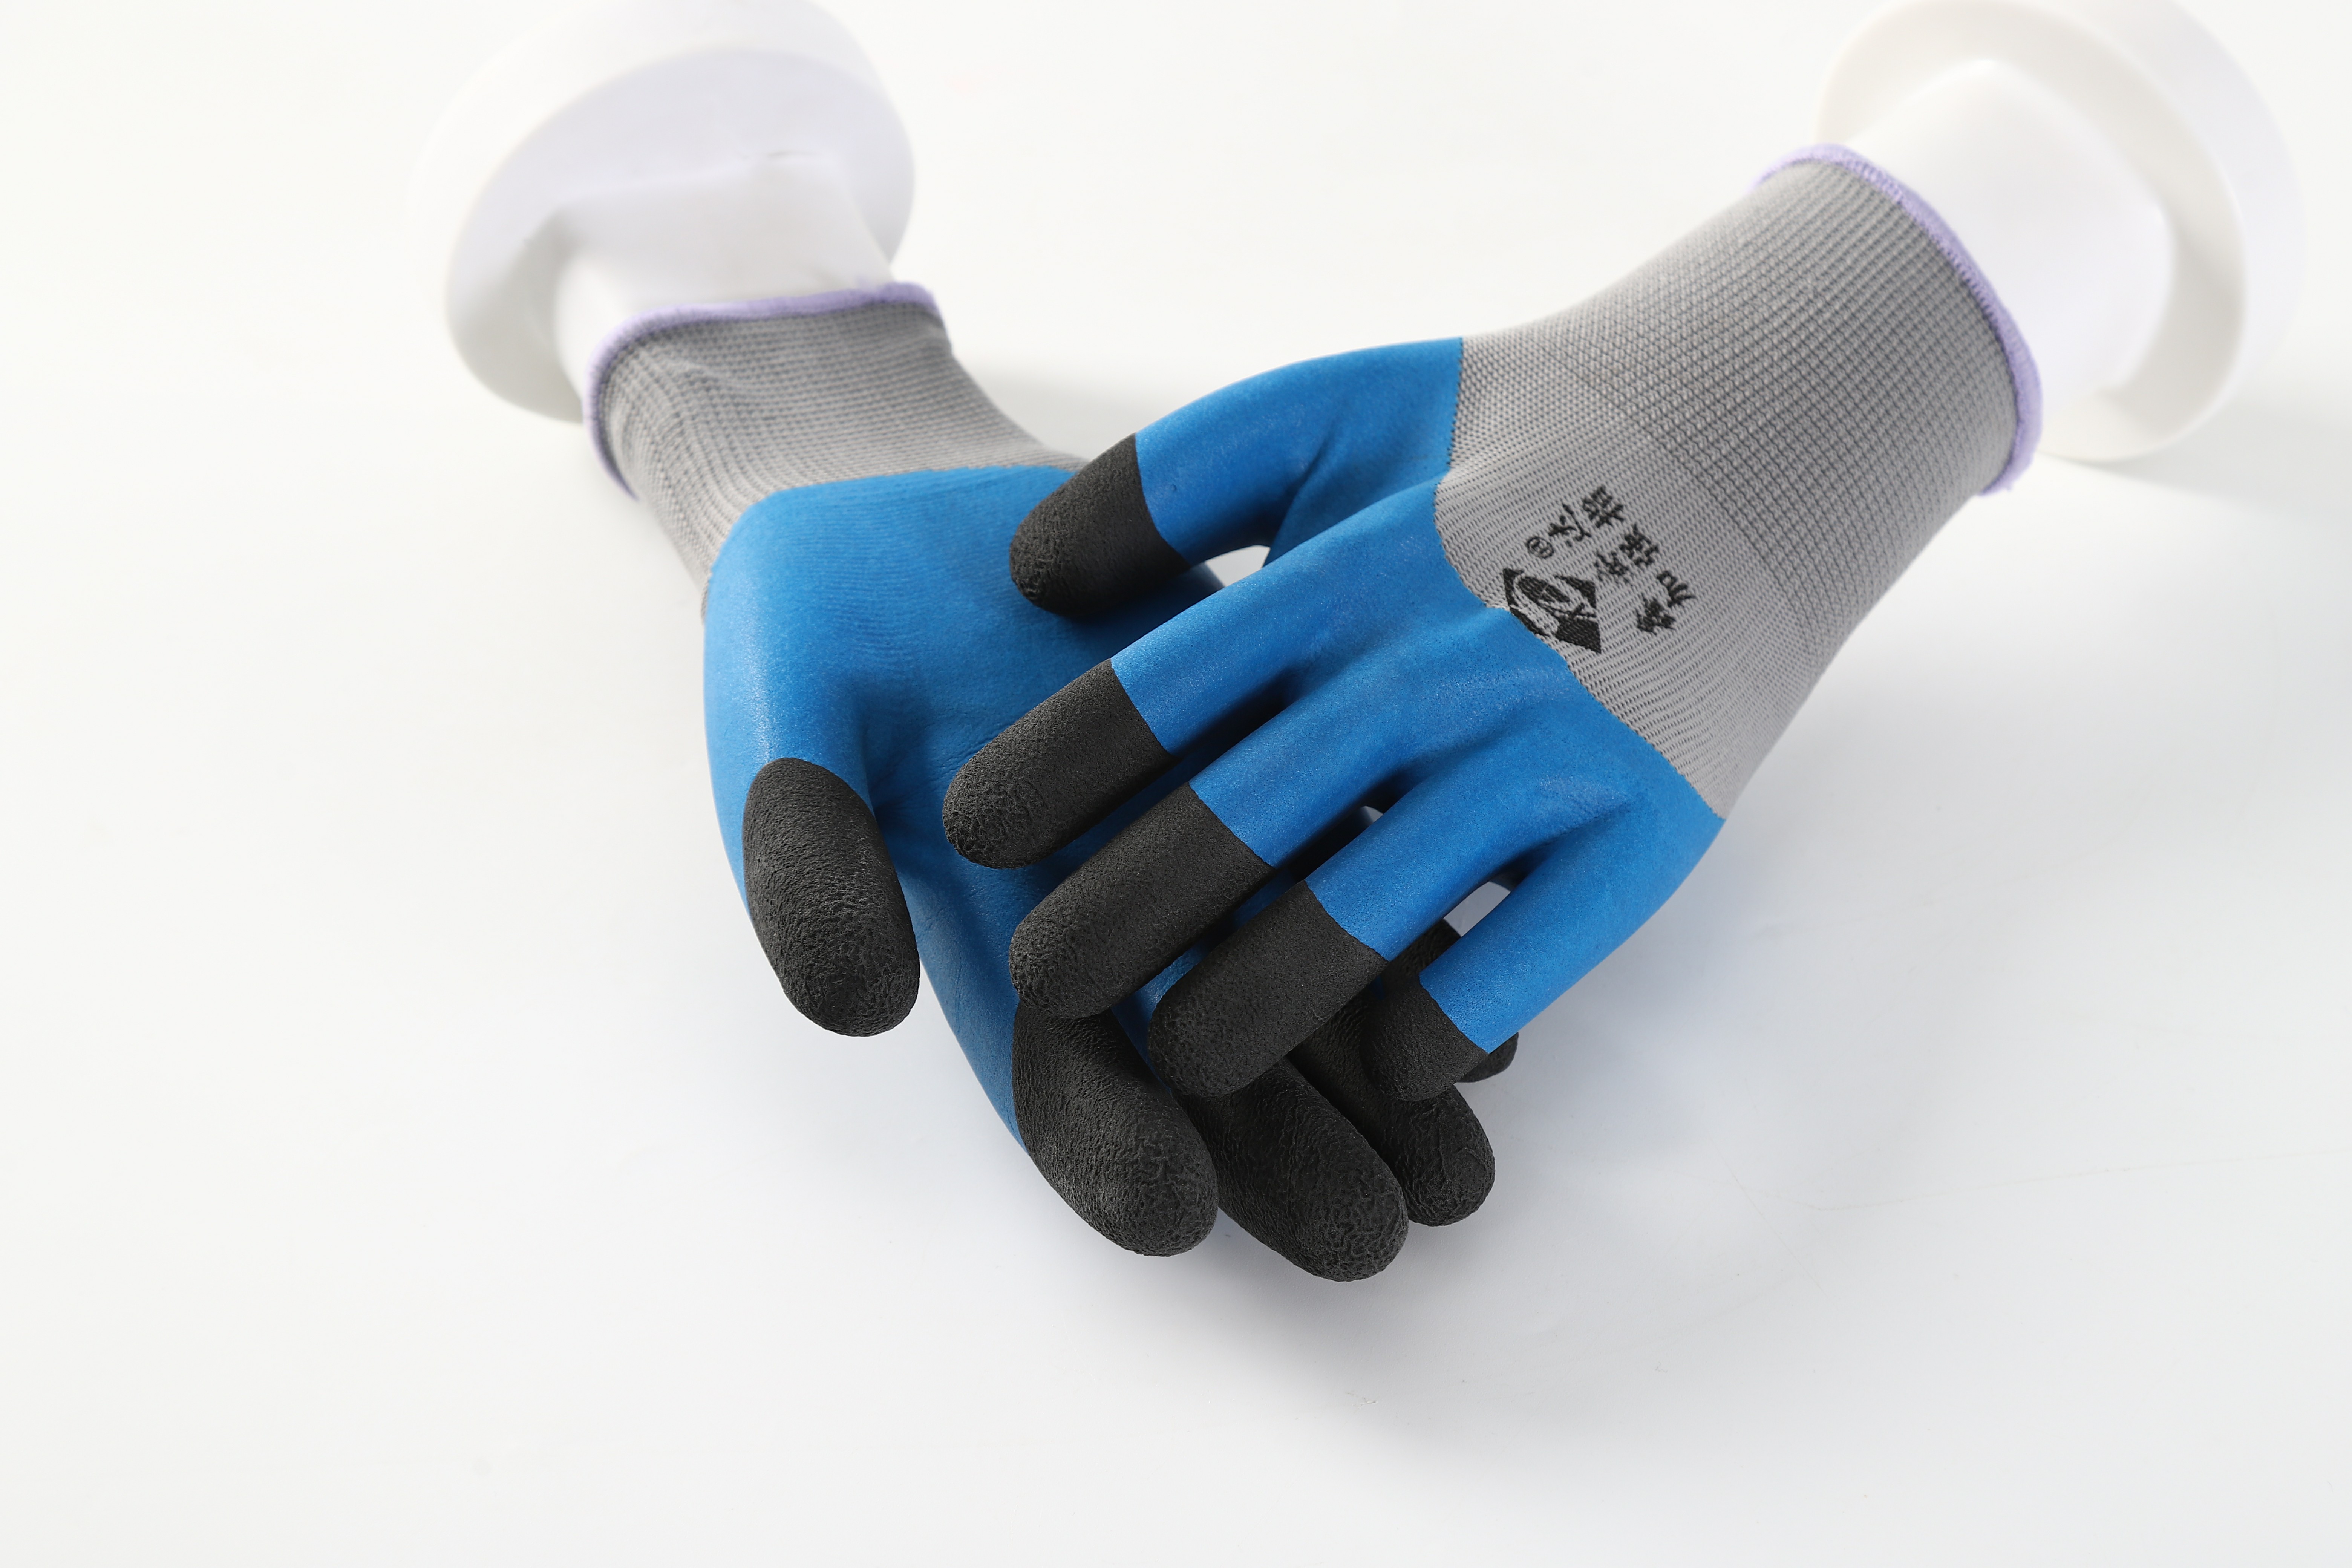 Latex foam coated Work Safety Labor Protection Industrial Construction Protective Gloves with finger strengthened